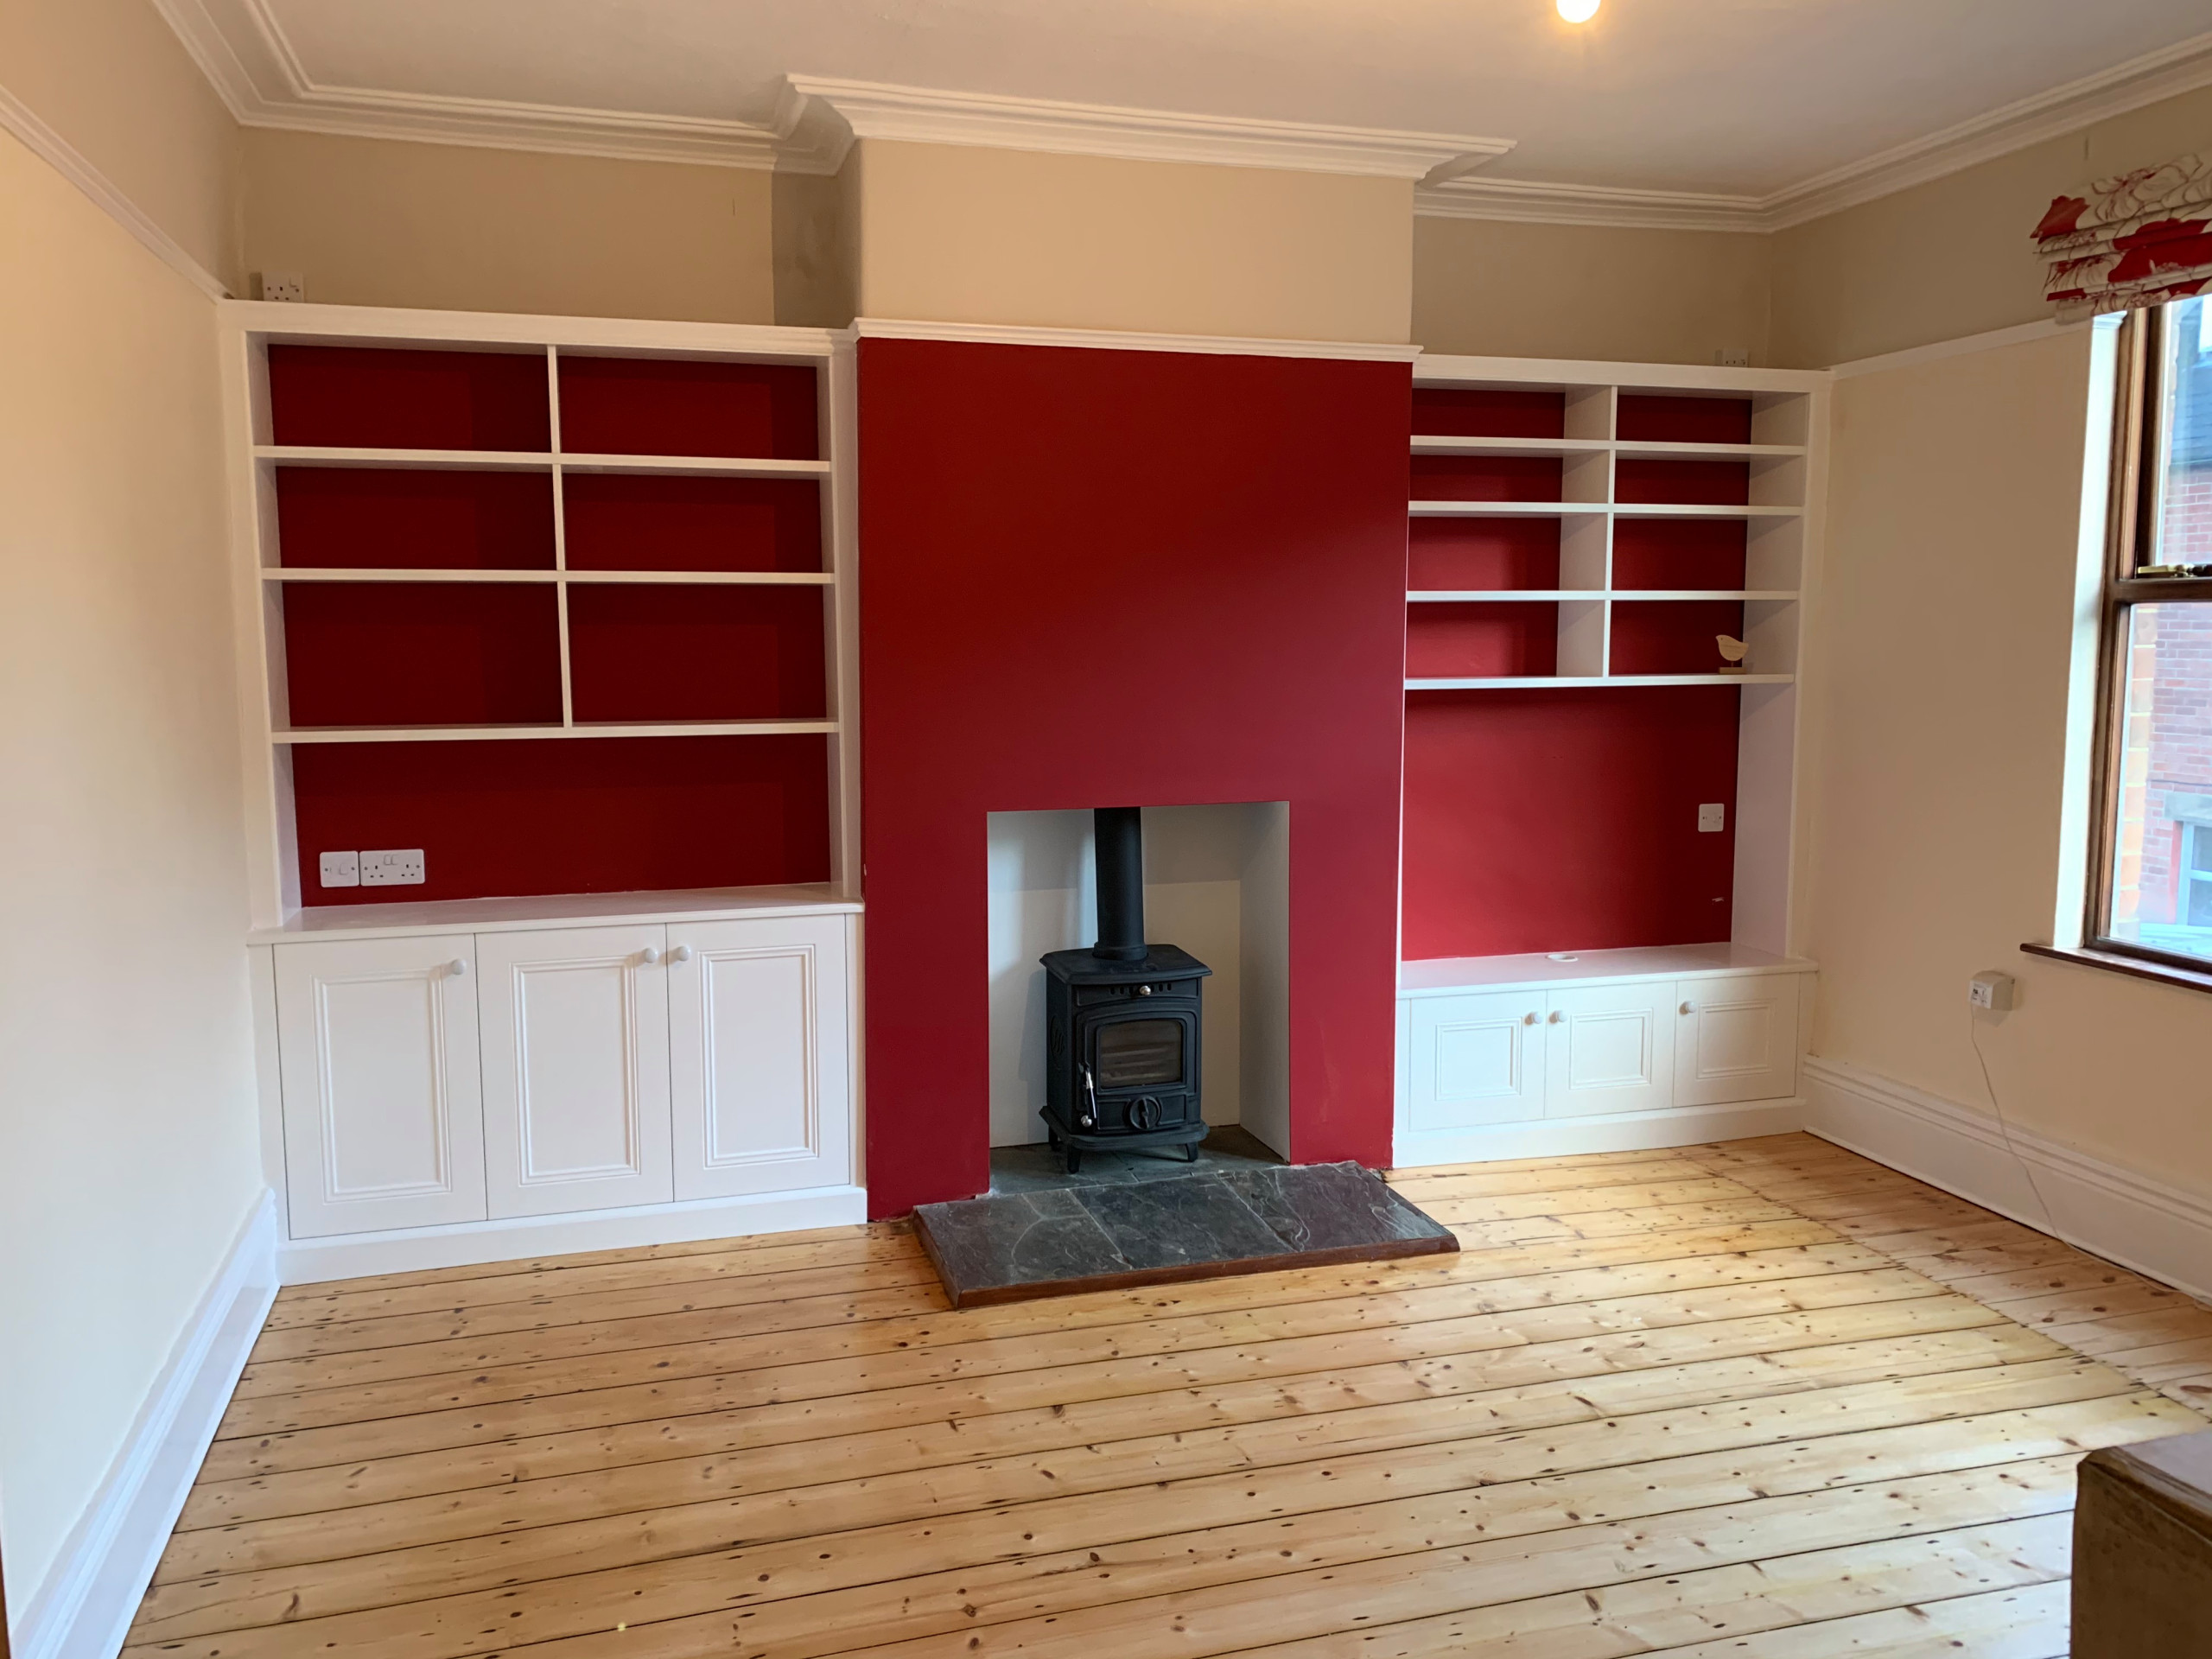 Classic Alcoves with Backless Bookcases Against a Red Wall